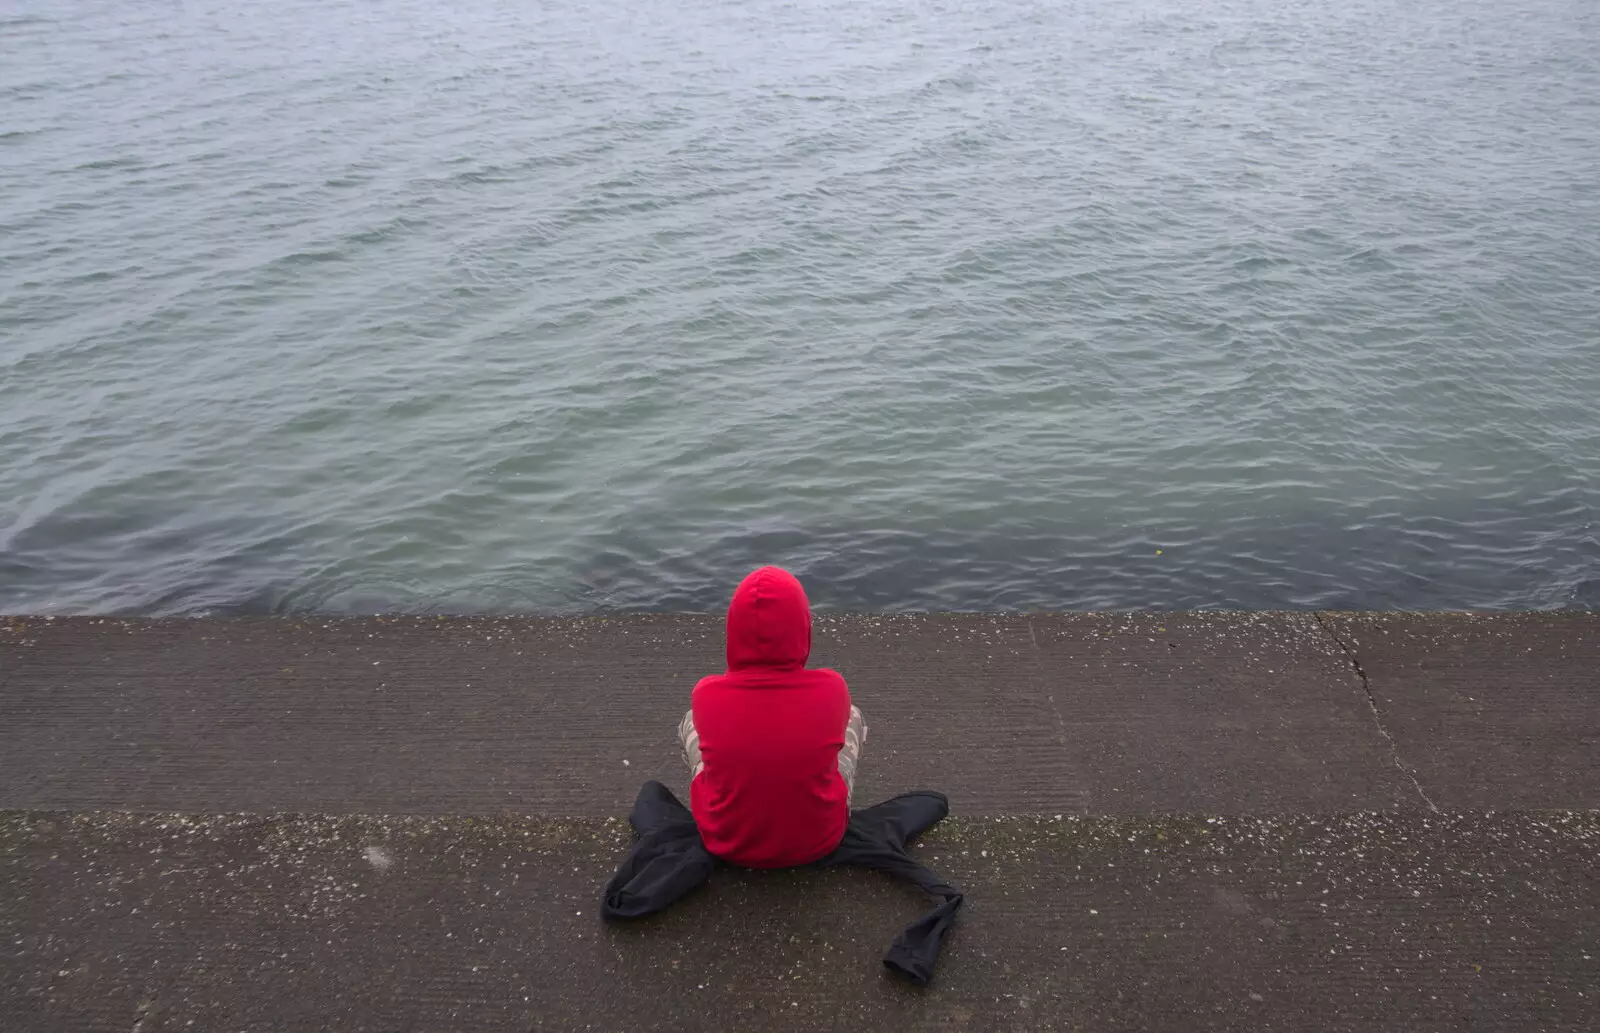 Fred watches the sea, from The End of the Breffni, Blackrock, Dublin - 18th February 2023